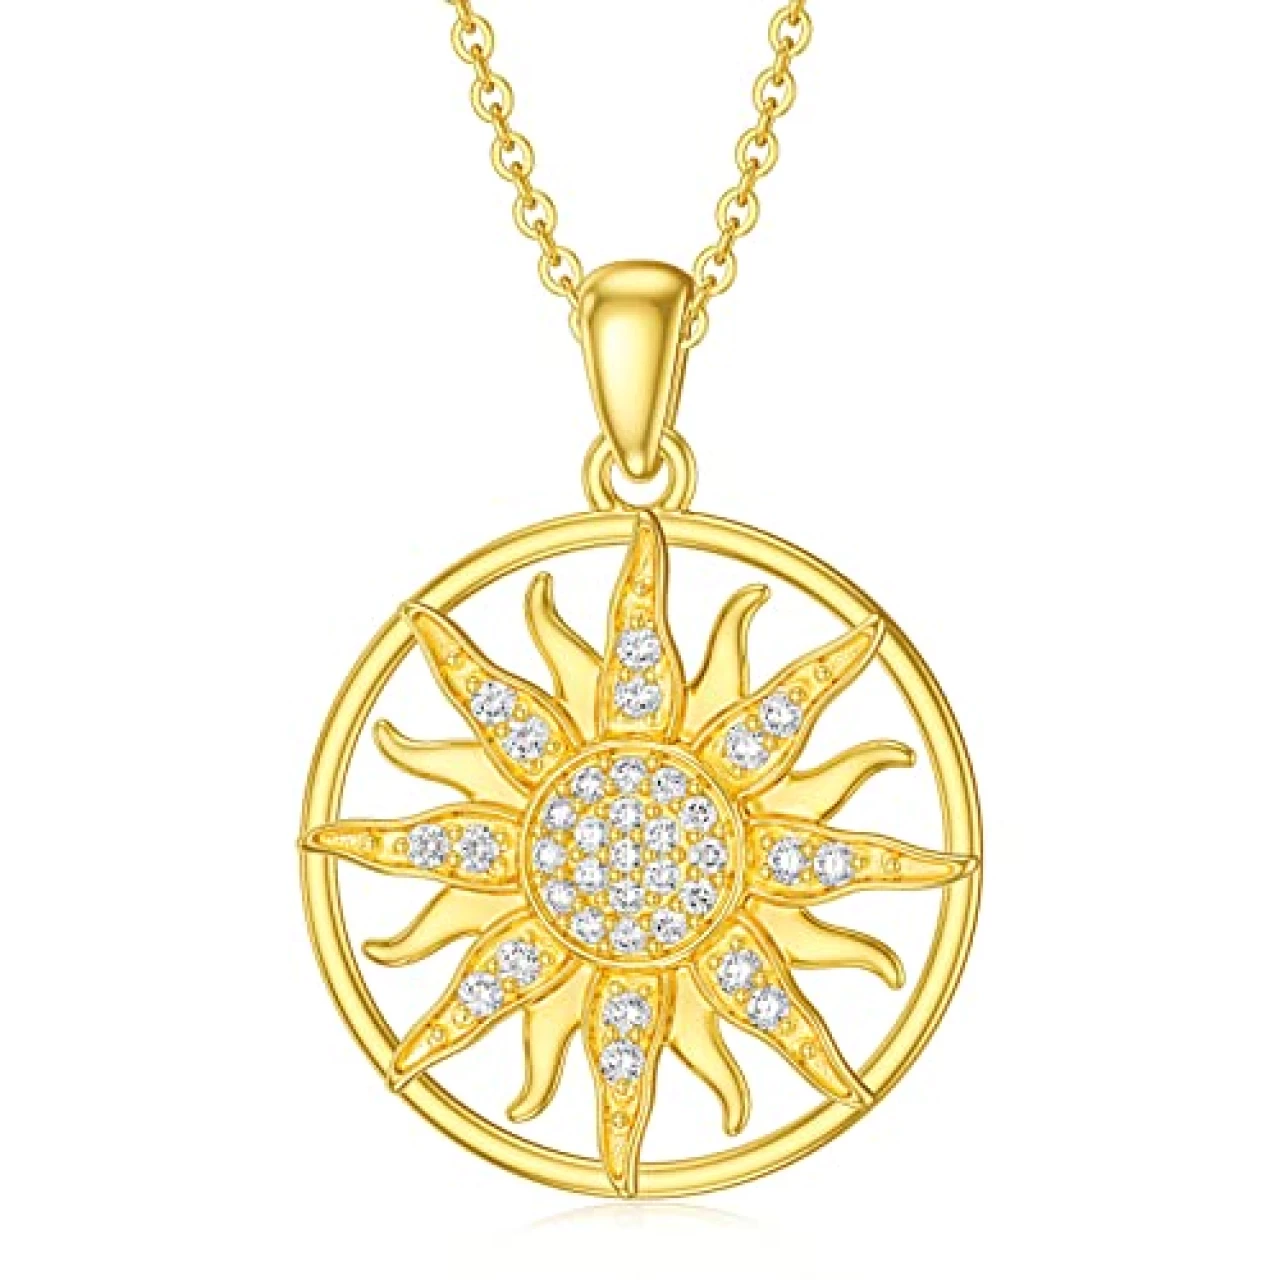 Blocaci 14K Gold Sun Necklaces for Women Solid Gold Sun Pendant Necklace with Cubic Zirconia Starburst Dainty Necklaces, 16&rsquo;&rsquo;-18&rsquo;&rsquo;